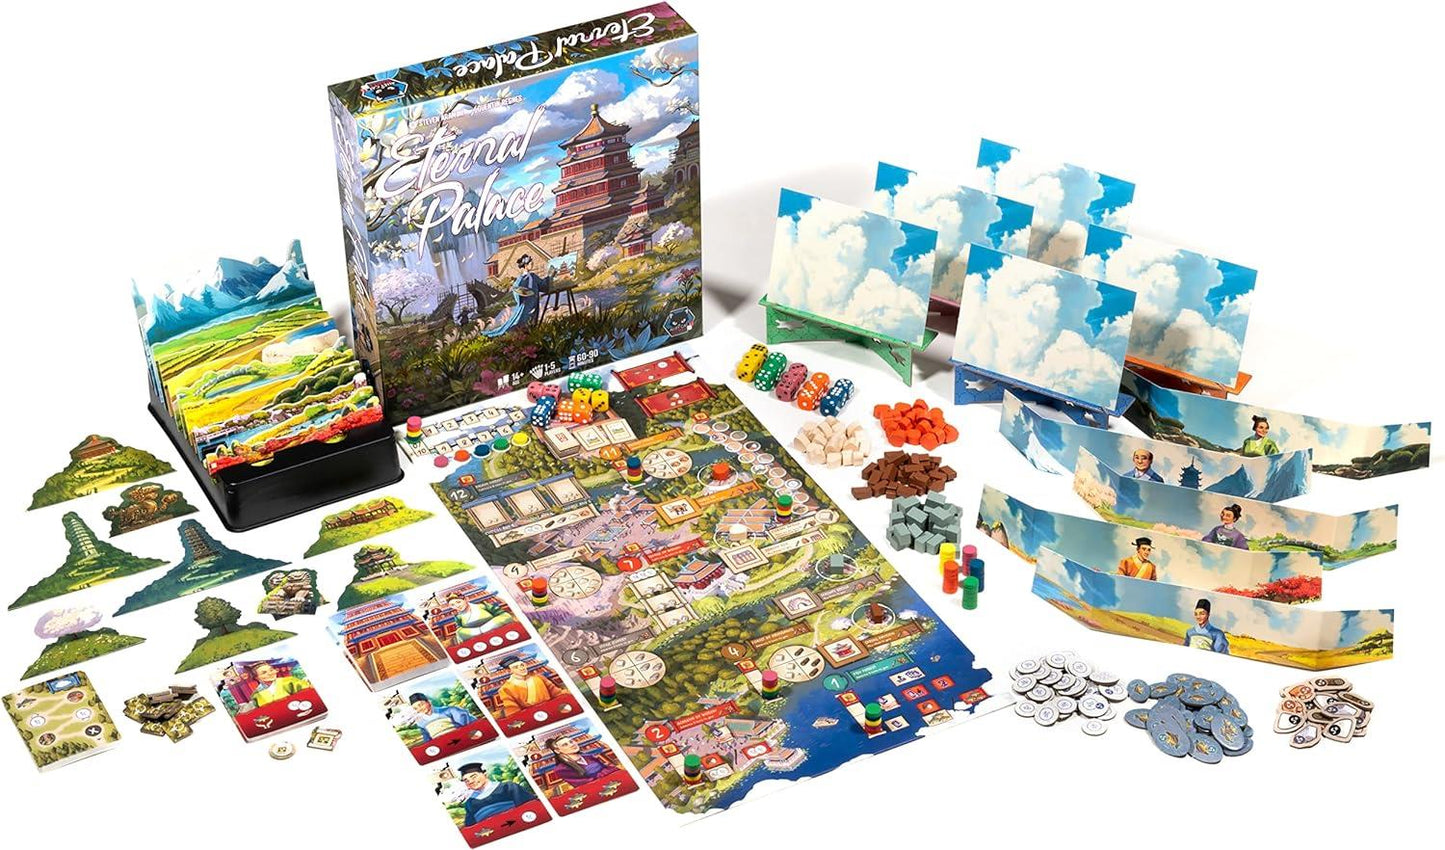 Eternal Palace Board game by Alley Cat Games